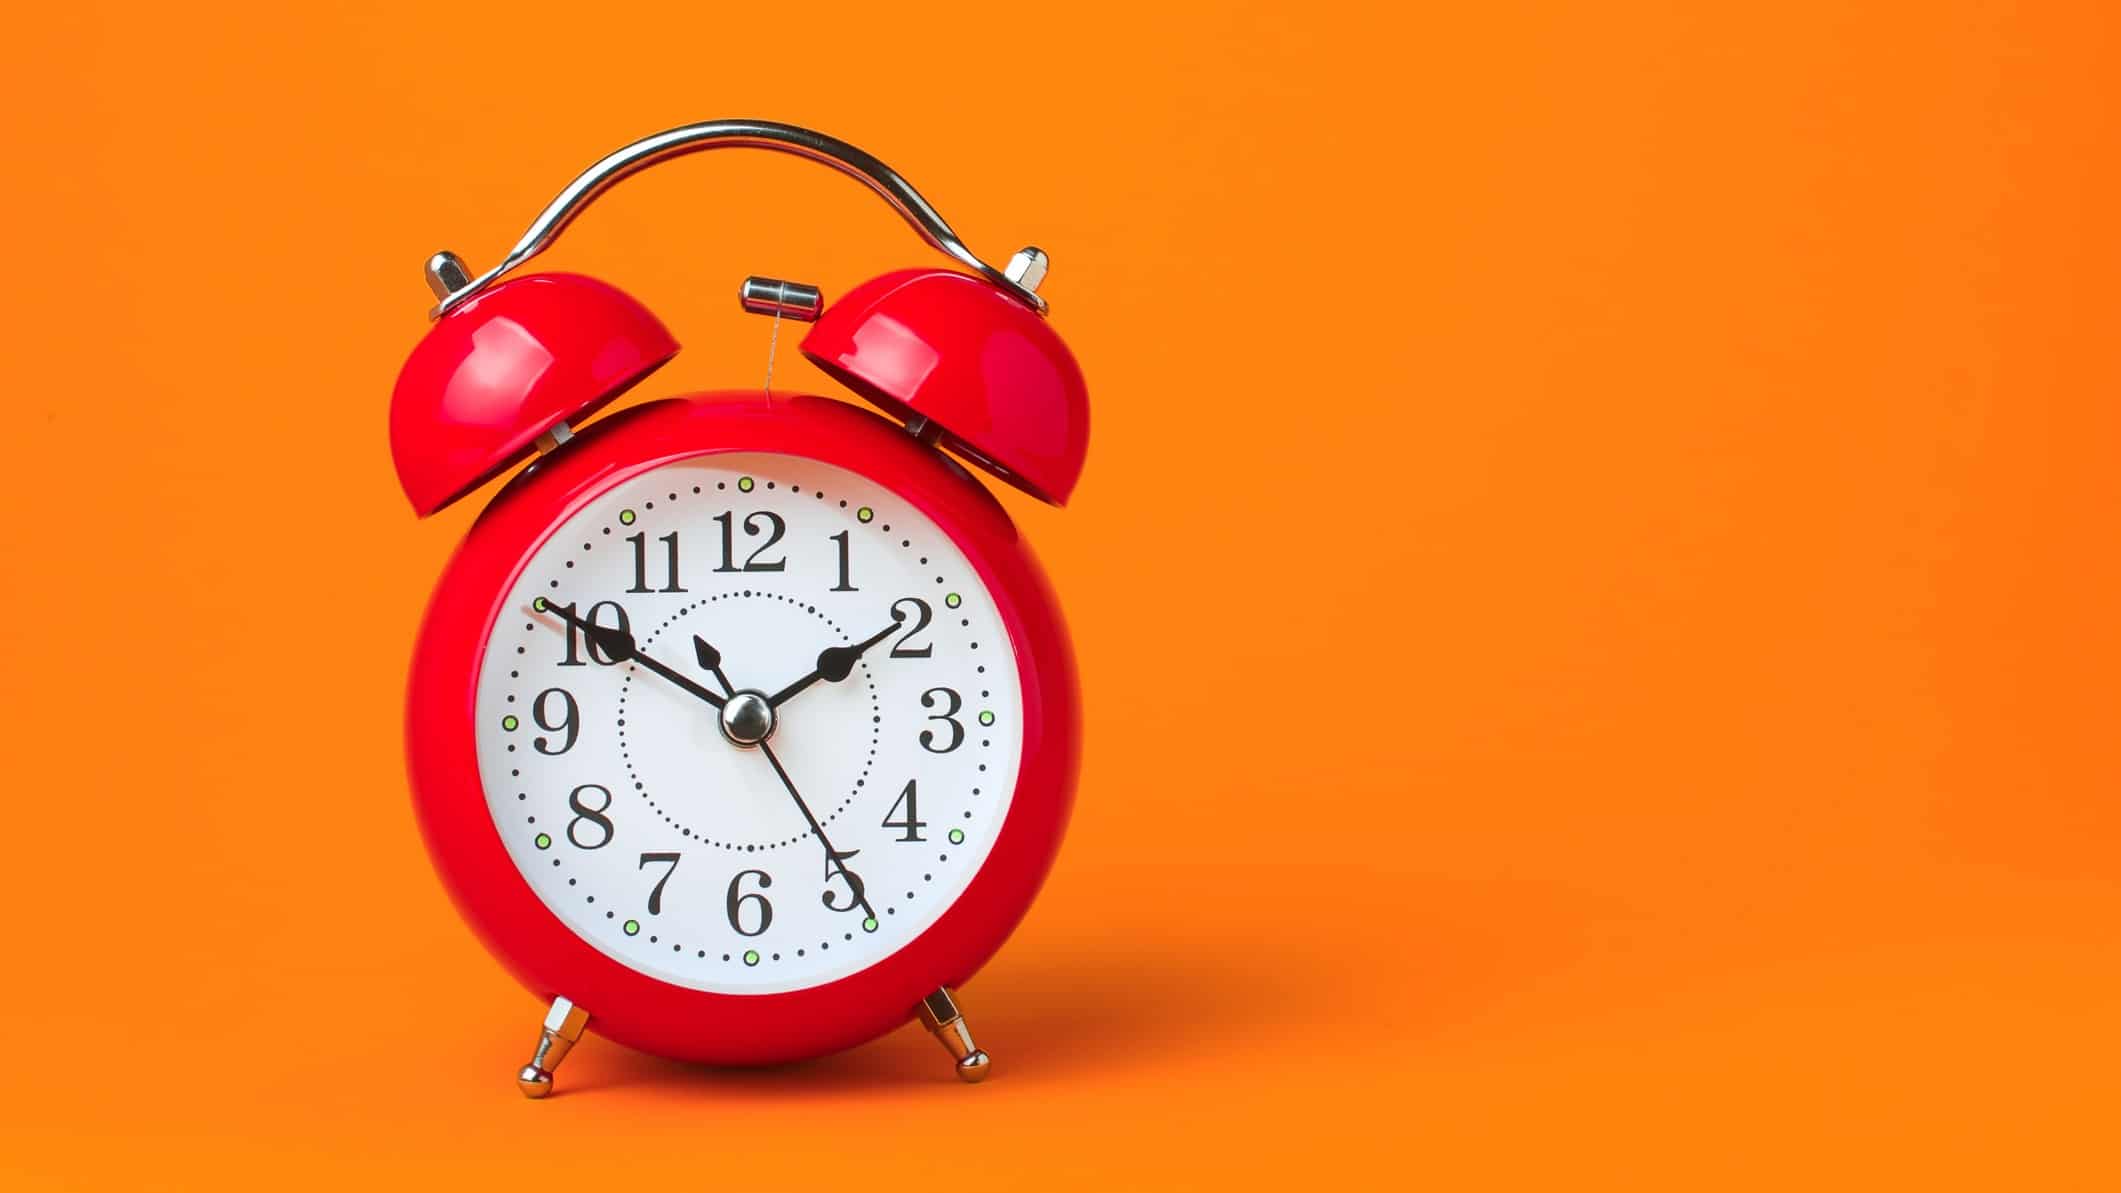 credit corp share price represented by red alarm clock against bright orange background